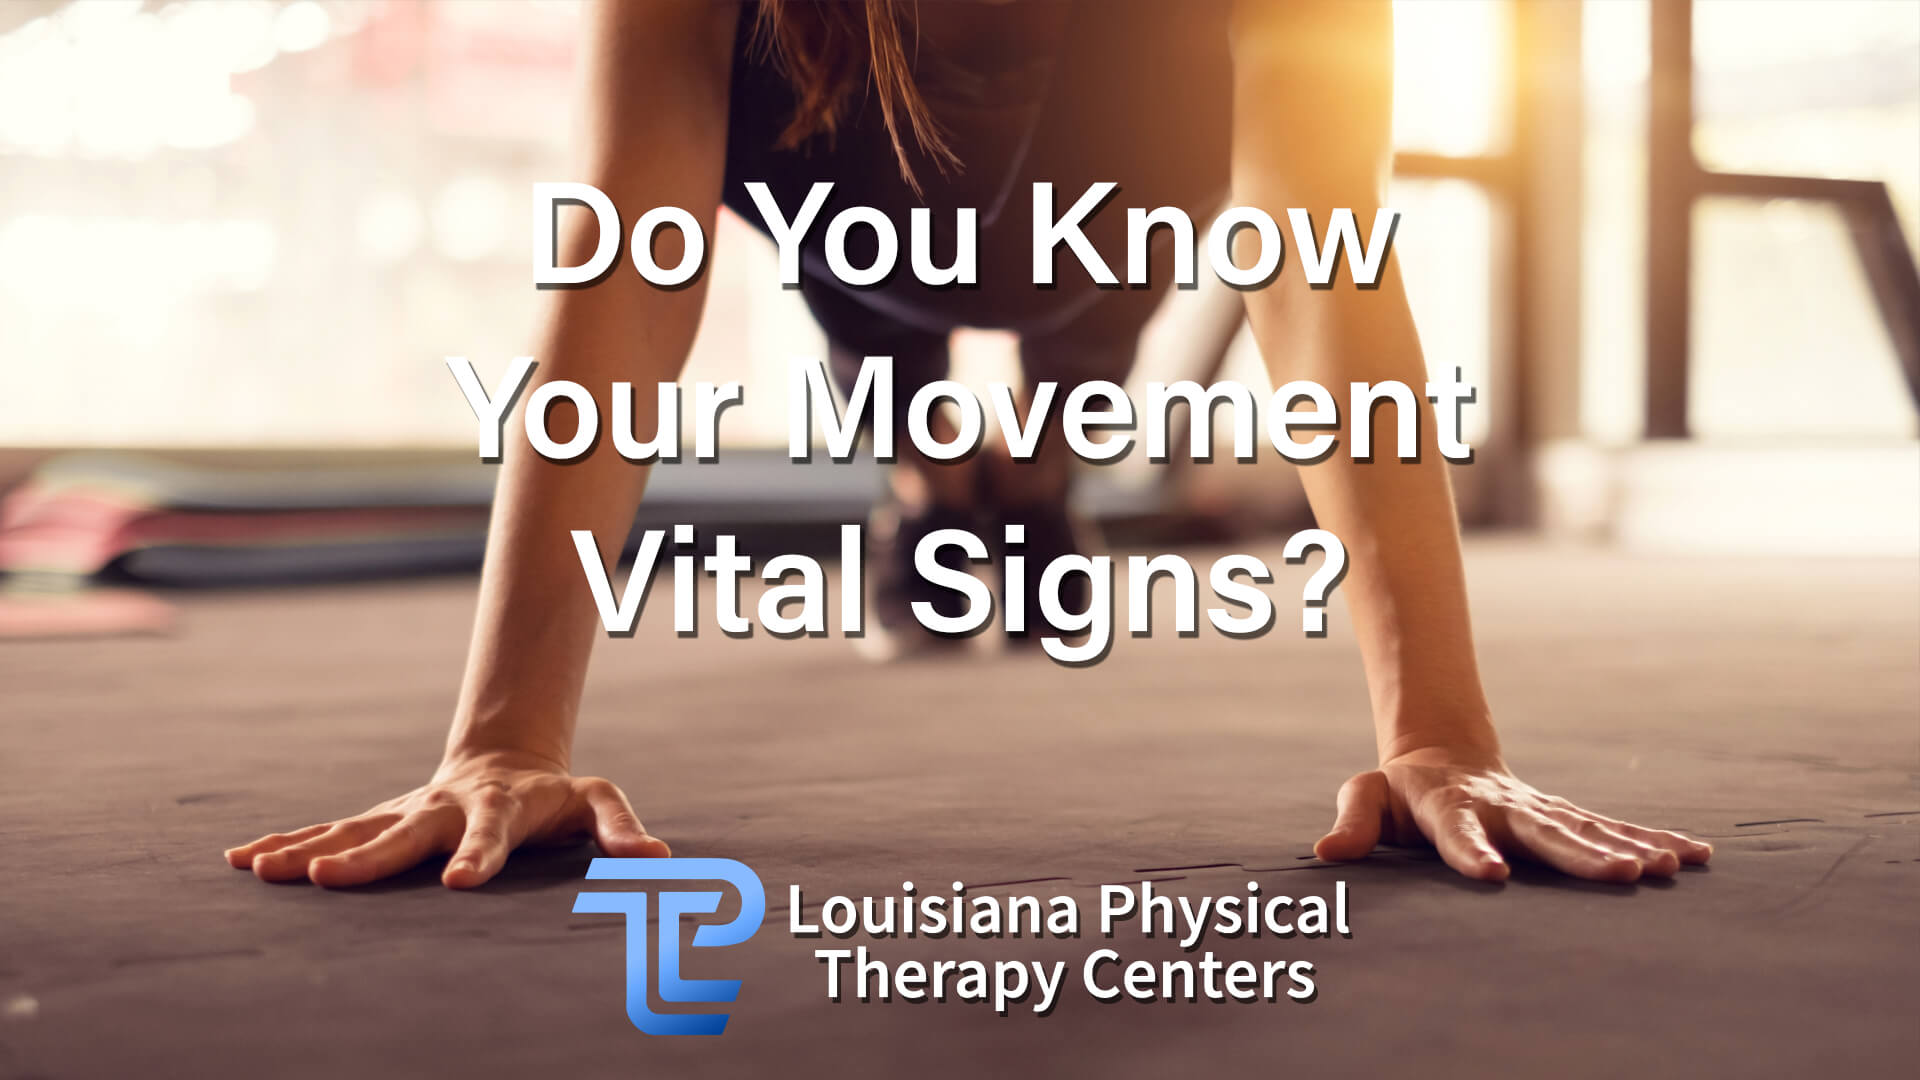 Do You Know Your Movement Vital Signs?